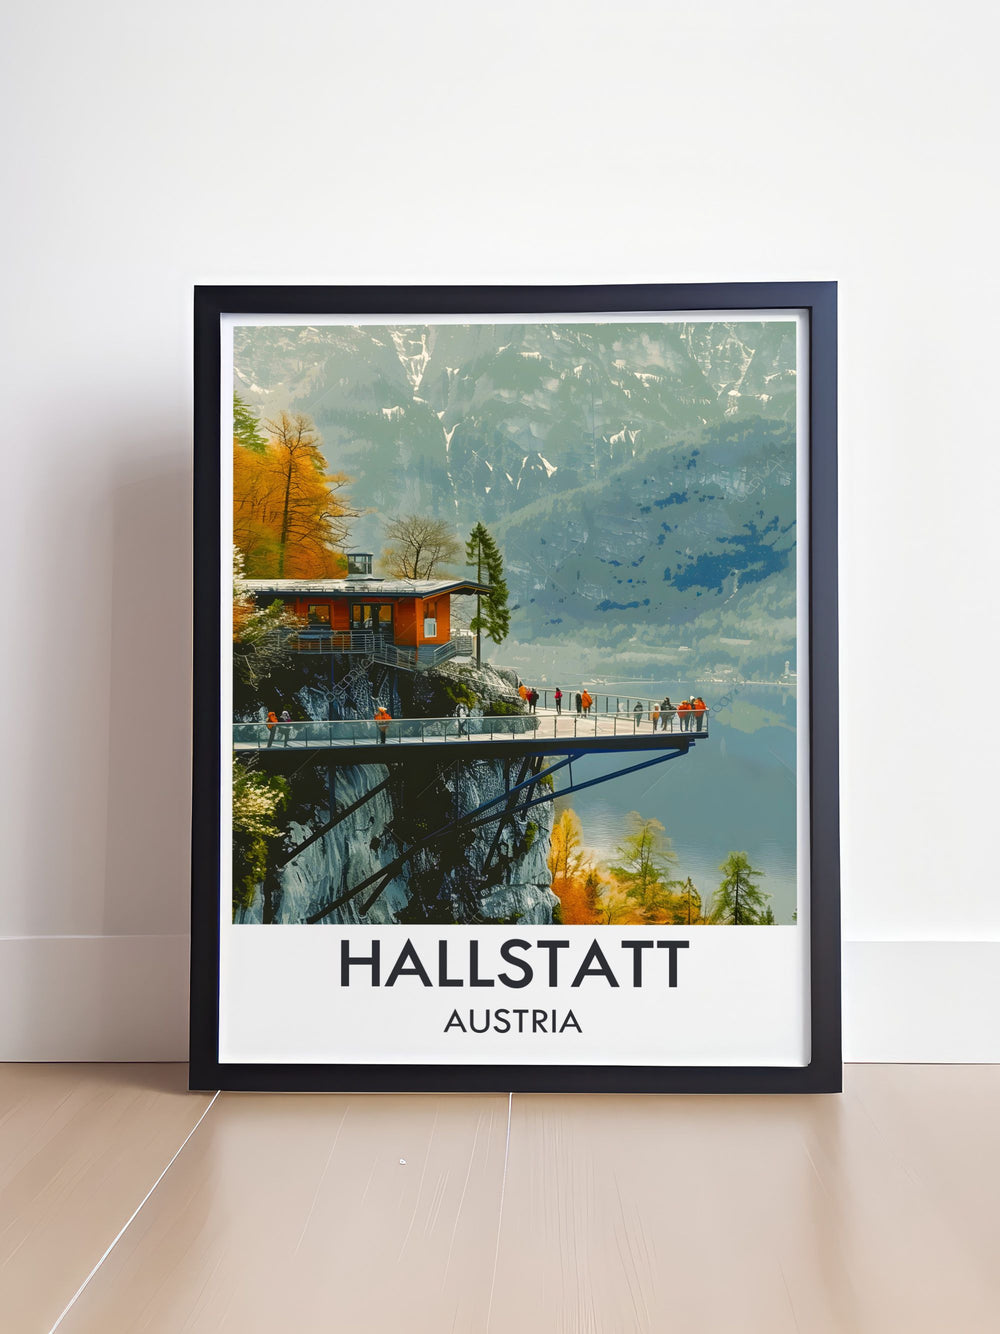 Featuring the serene landscapes of Hallstatt, this travel poster captures the tranquil beauty and picturesque views, perfect for creating a relaxing ambiance in any room.